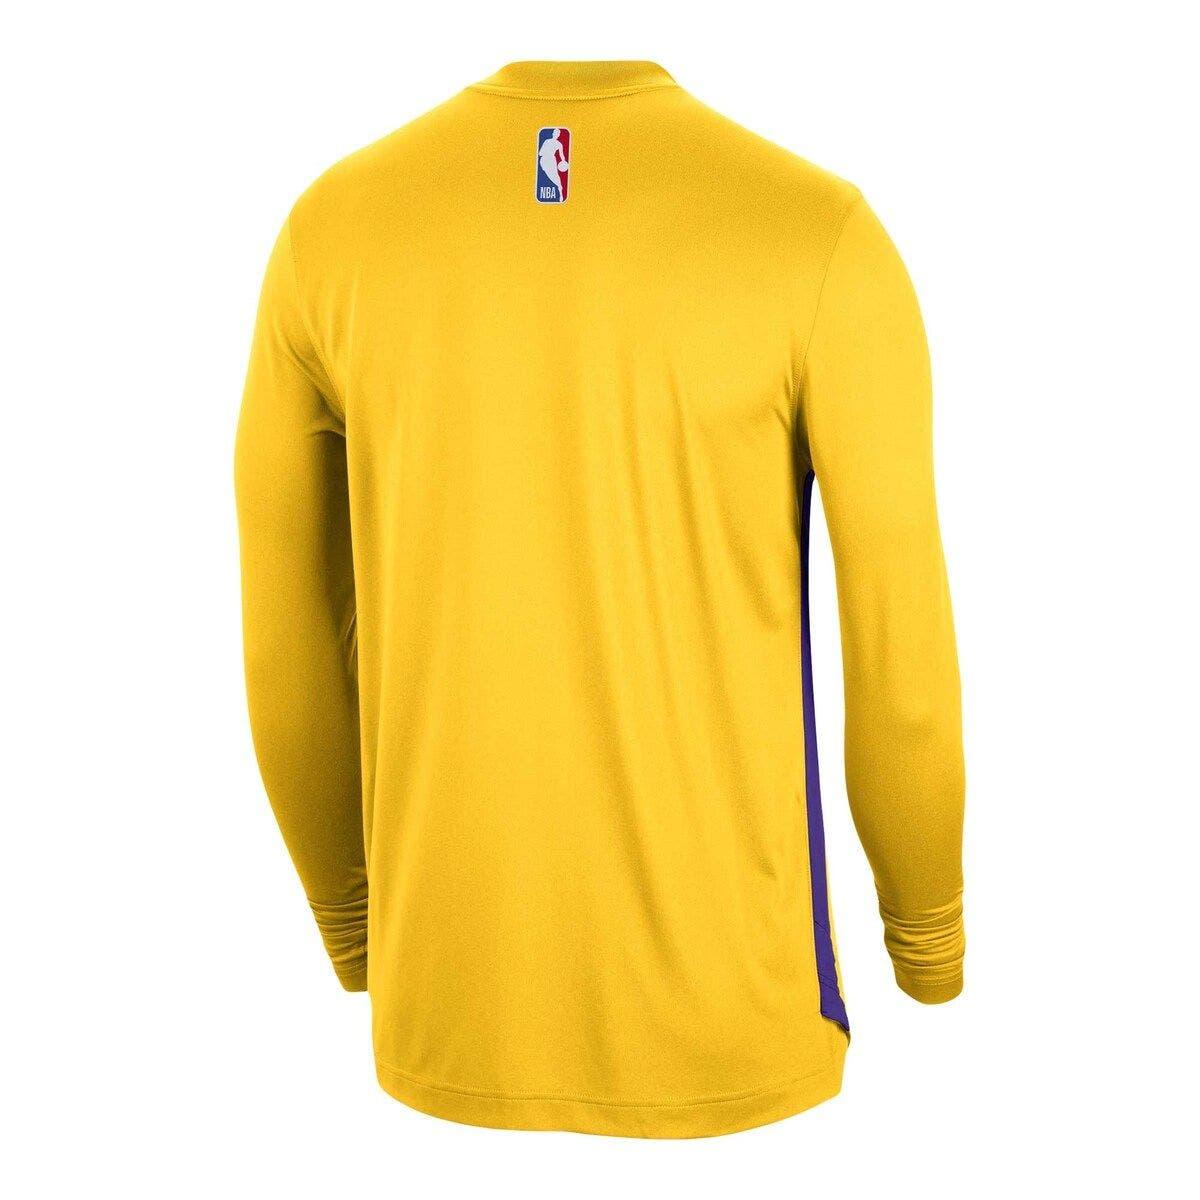 Official Los Angeles Lakers Nike Long-Sleeved Shirts, Nike Long Sleeve T- Shirts